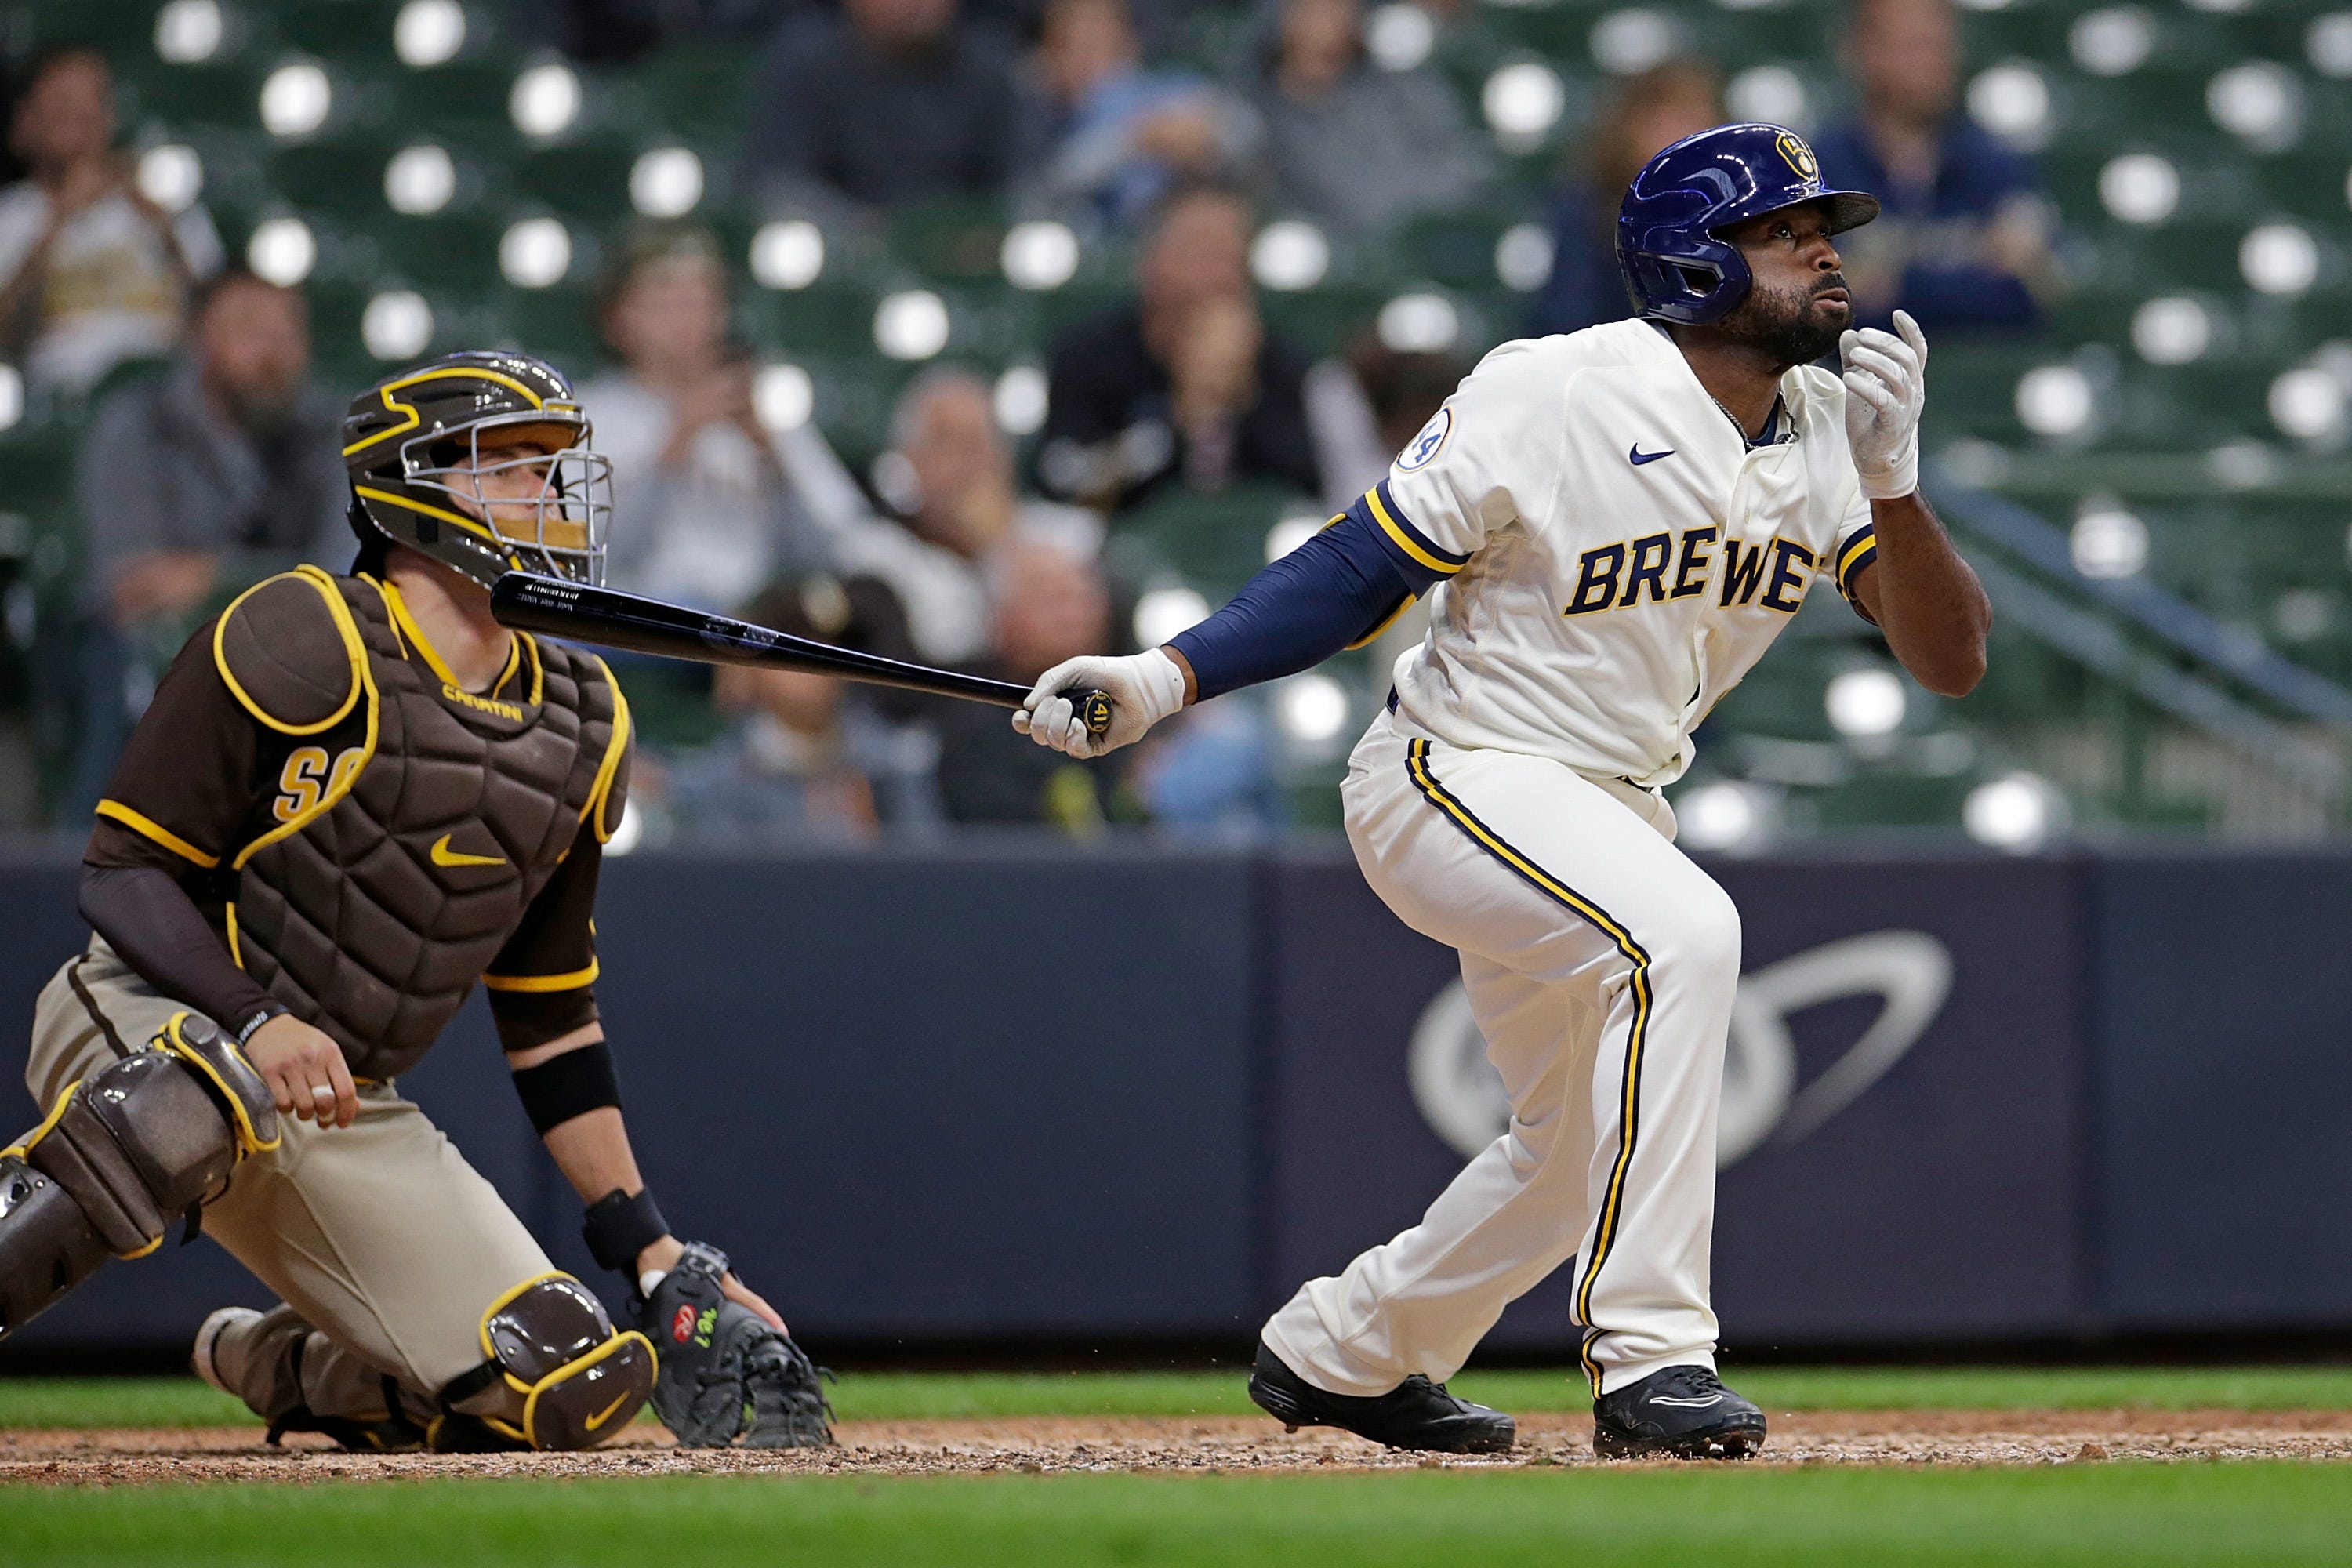 MJS: Brewers 